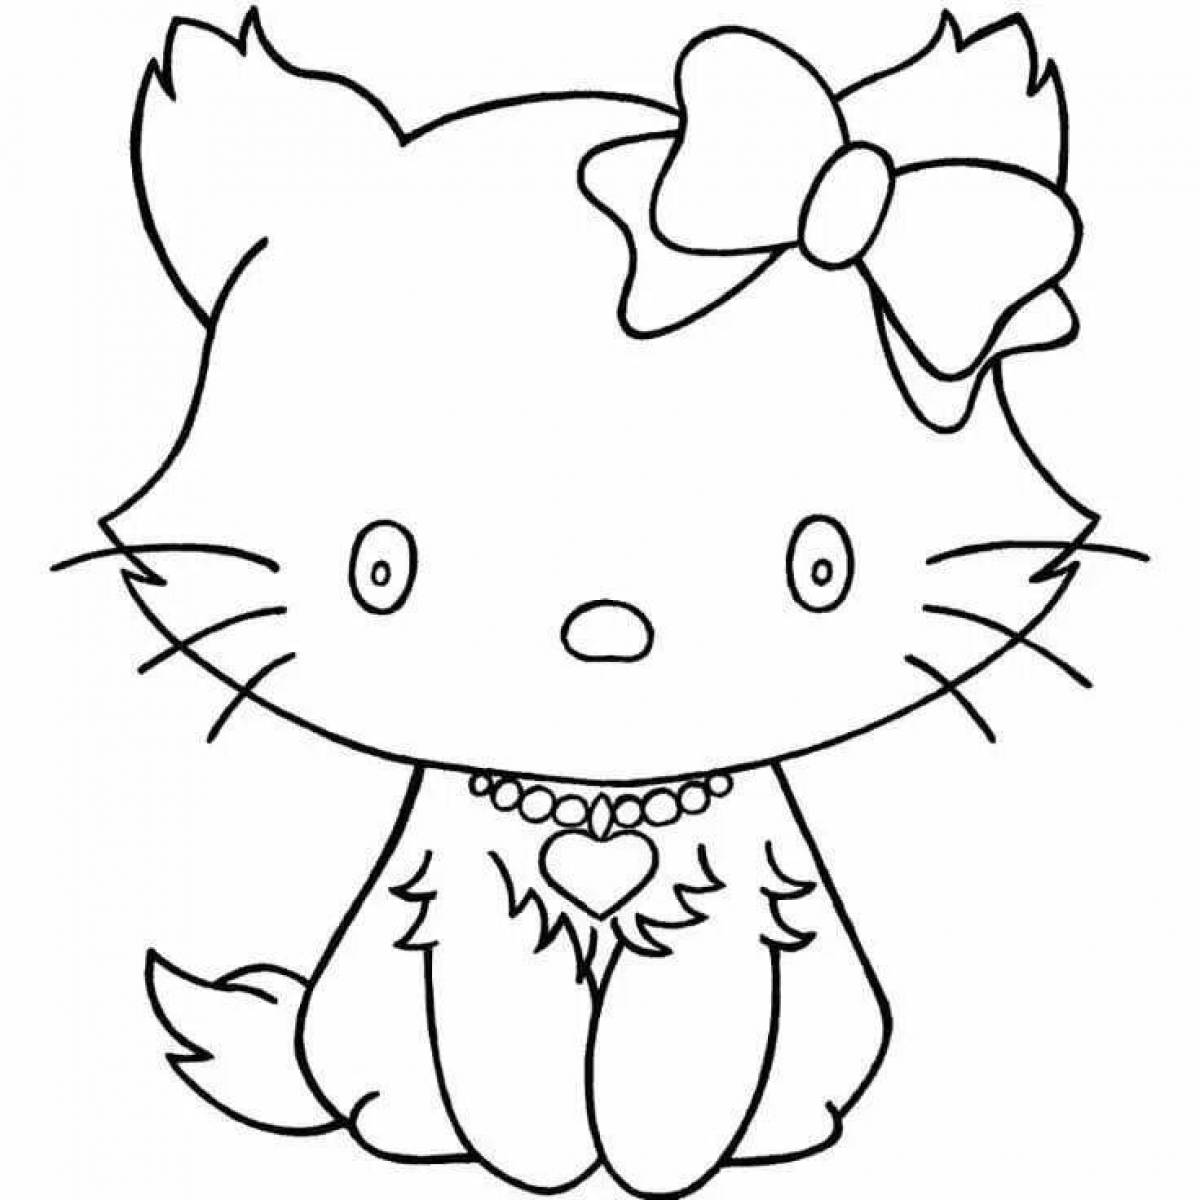 Coloring page witty cat with a bow